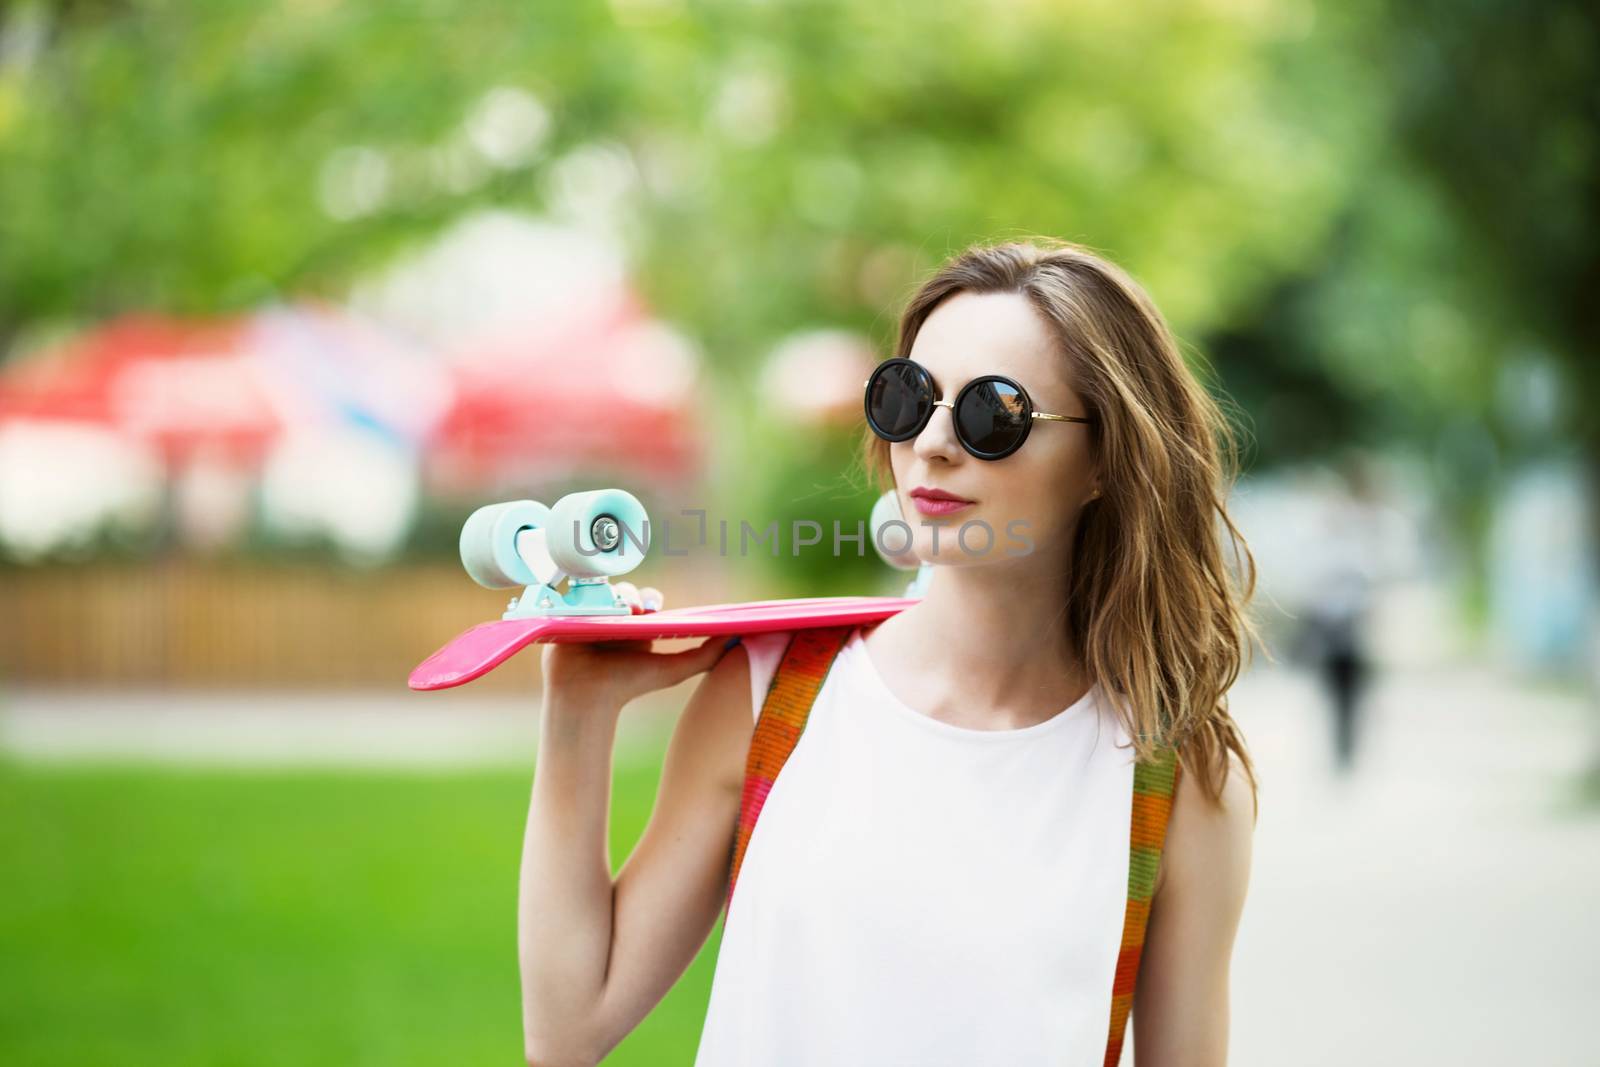 Portrait of lovely urban girl in white dress with a pink skateboard. Happy smiling woman. Girl holding a plastic skate board outdoors. City life.